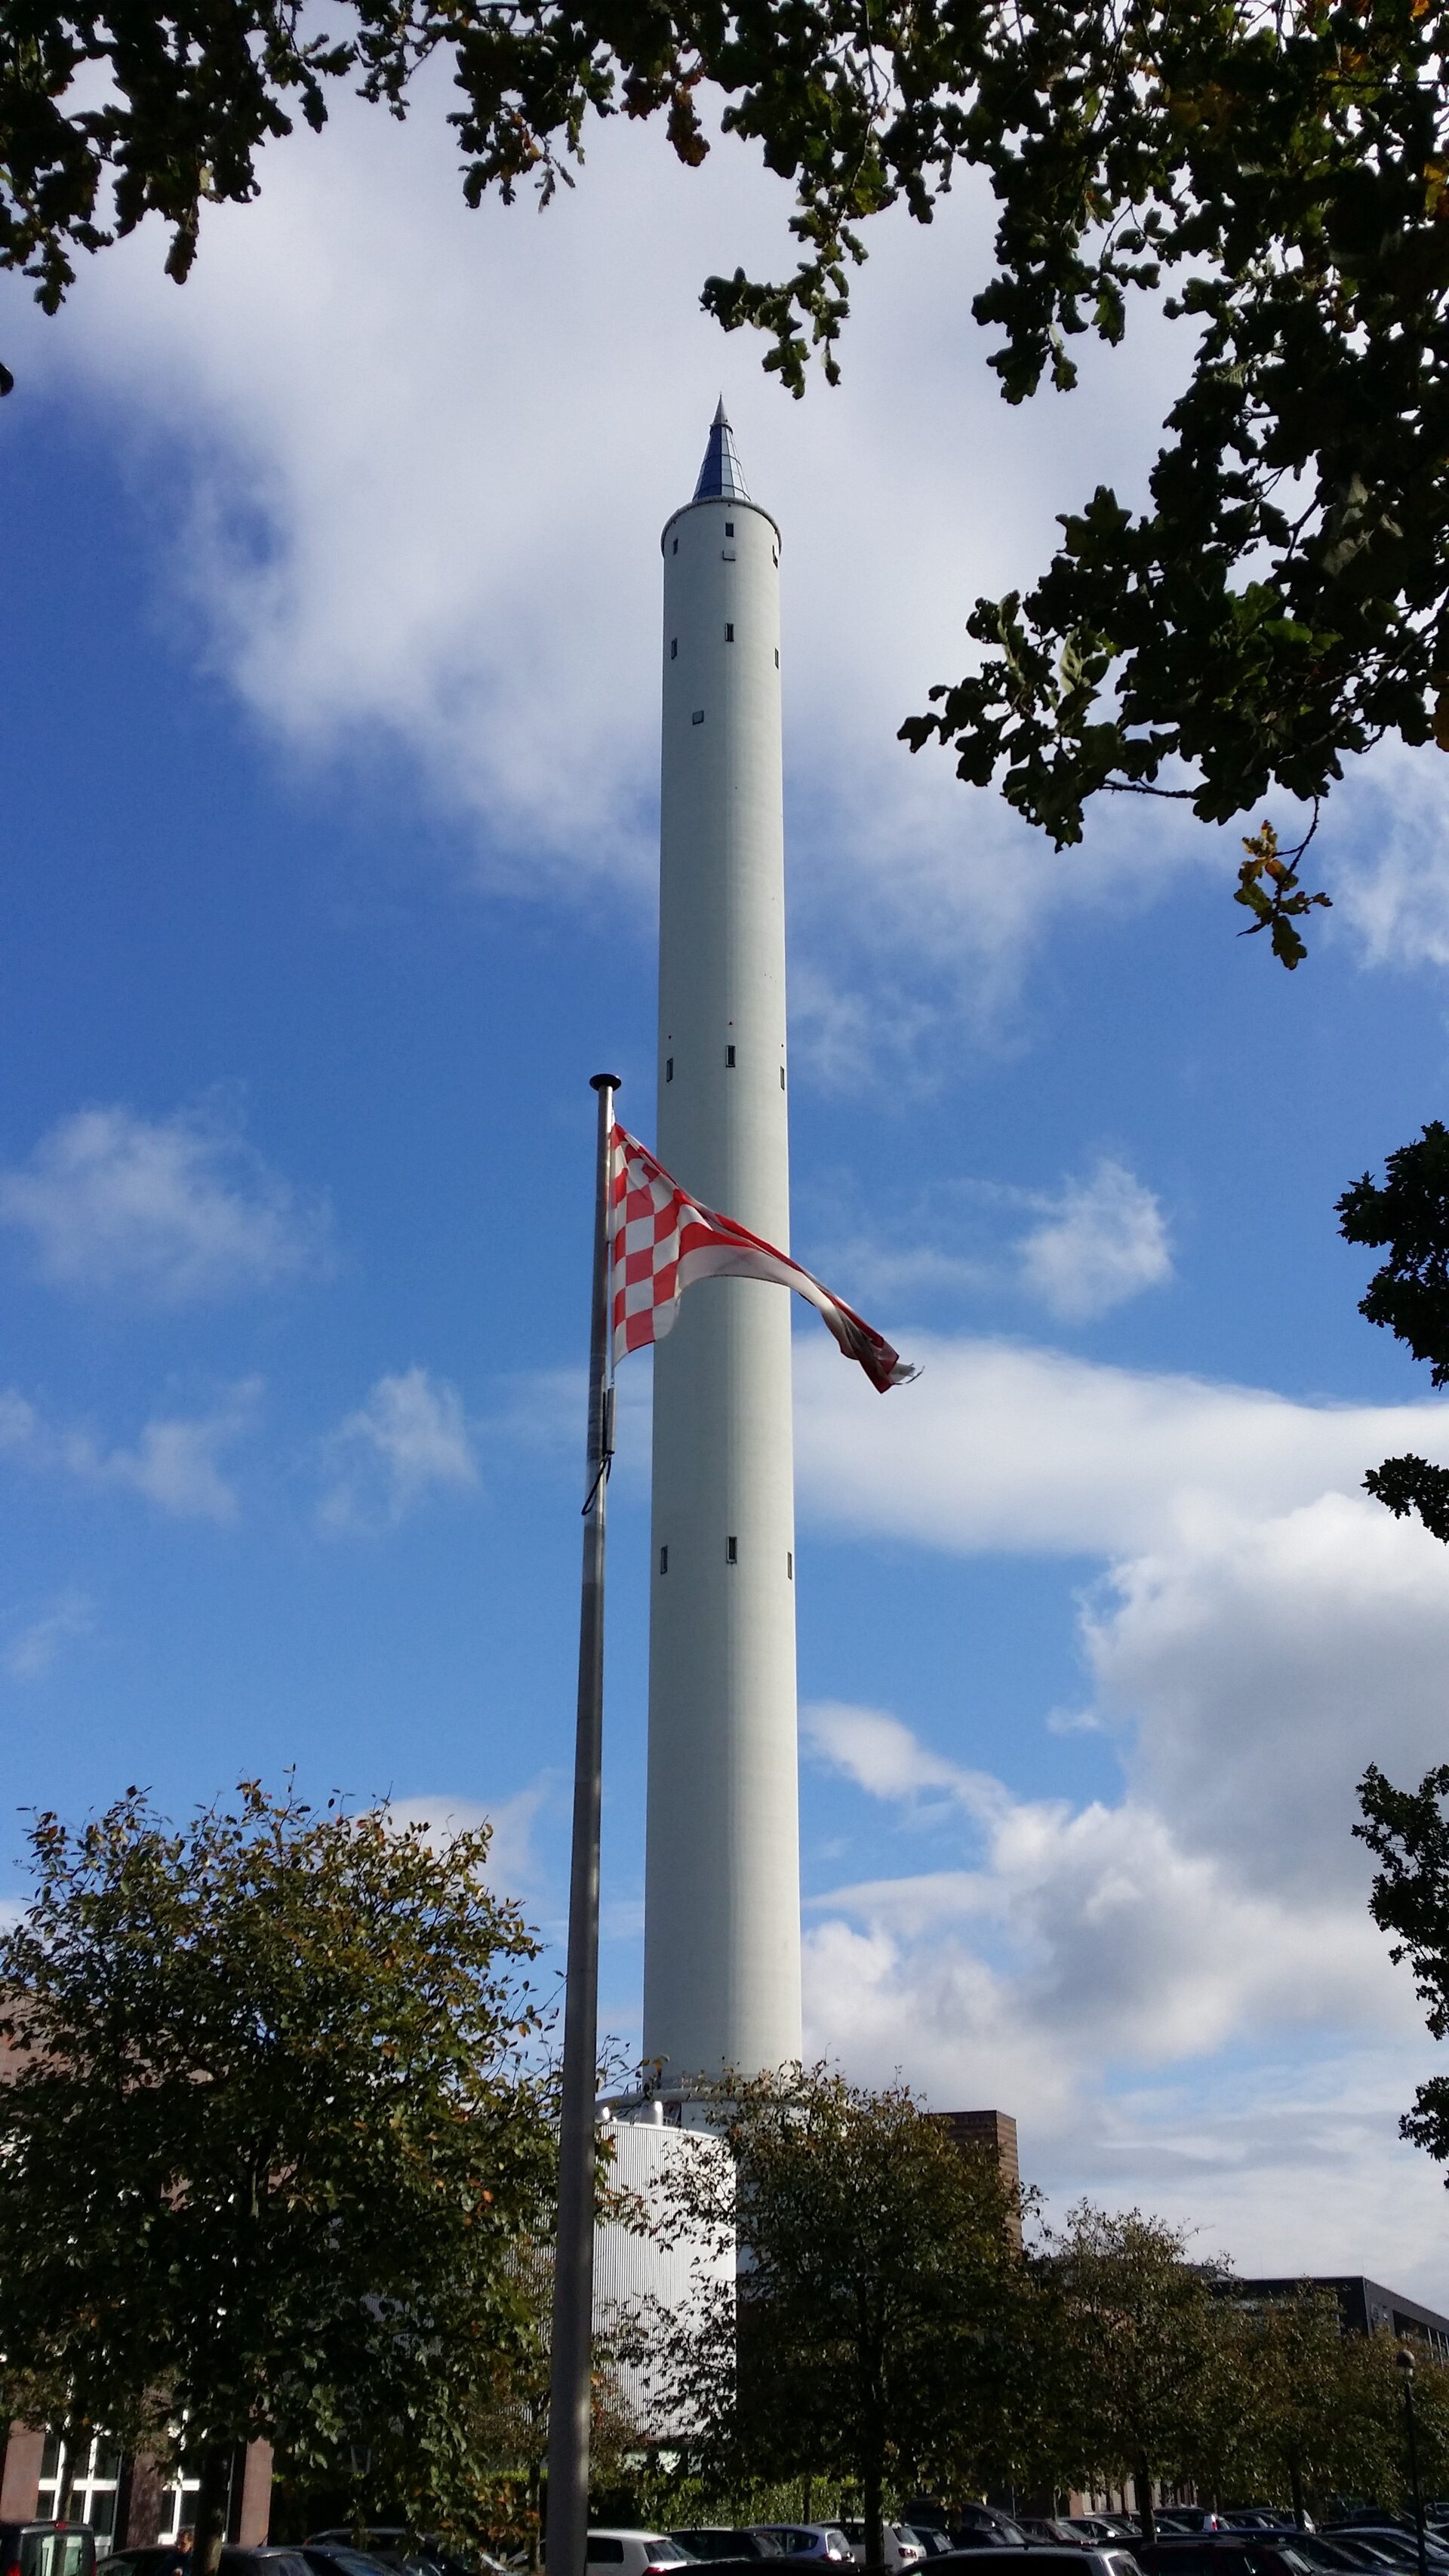 The ZARM Drop Tower behind the flag of Bremen